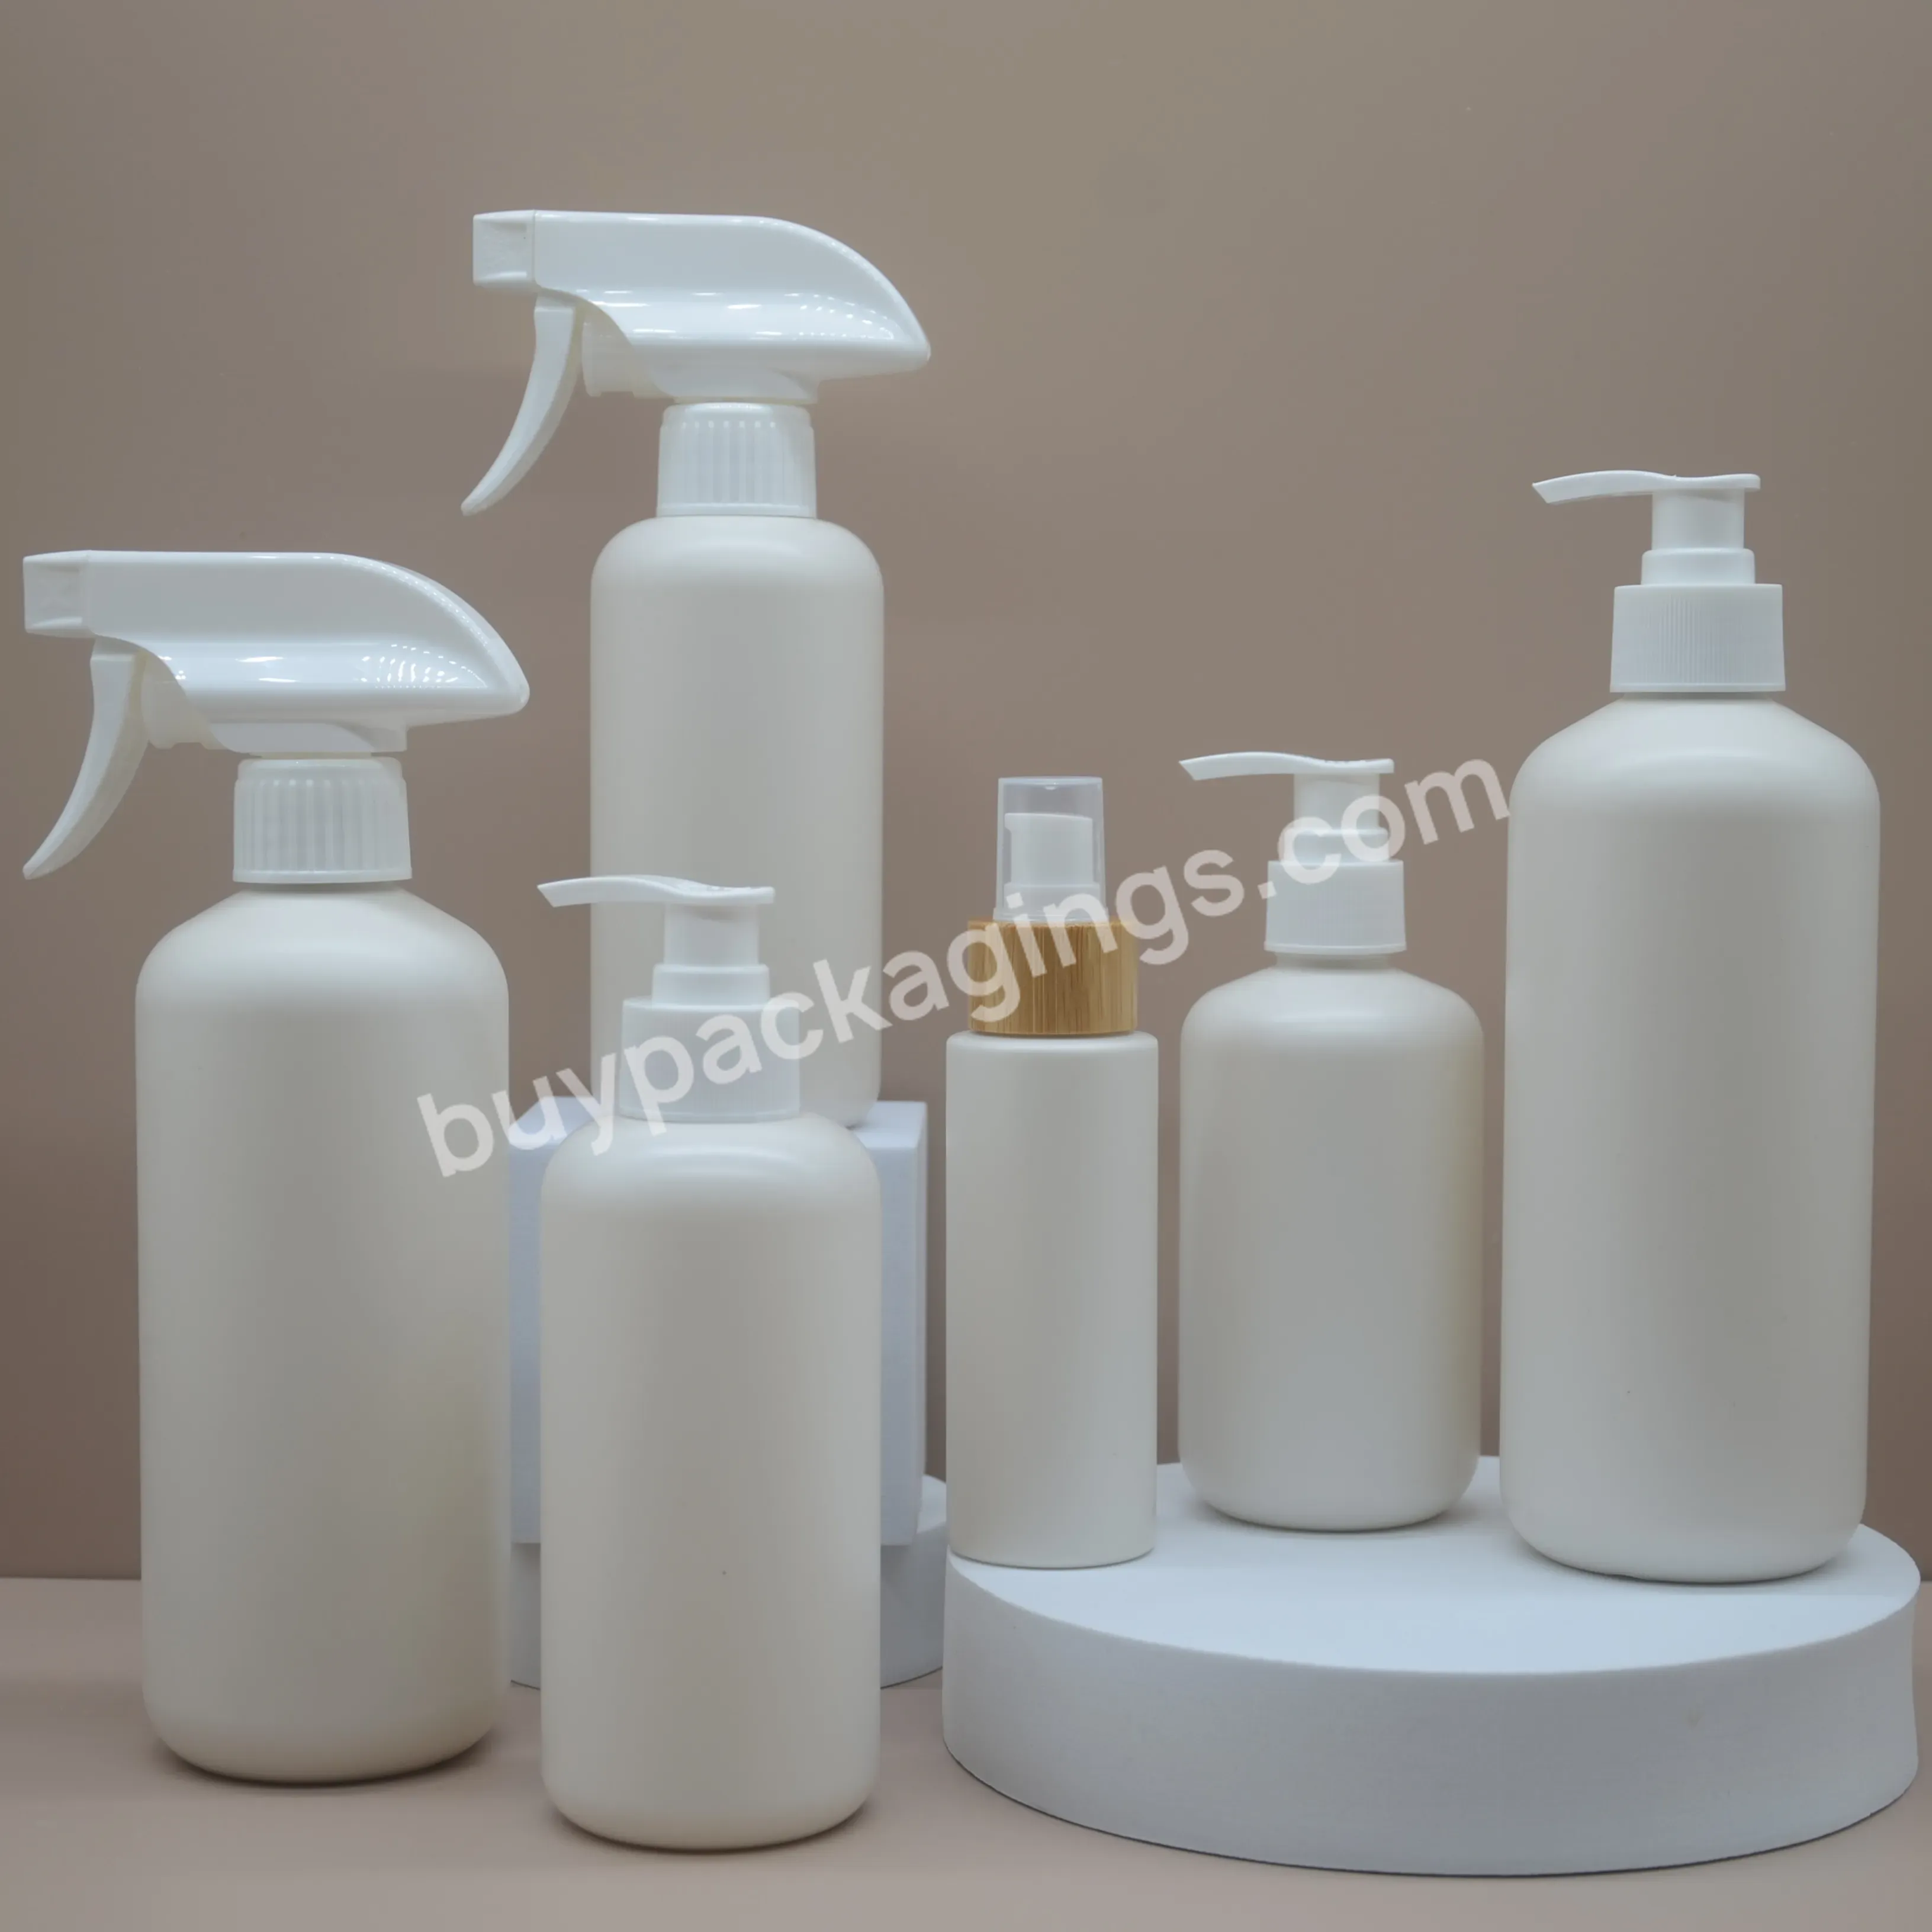 Wholesale Customized Hot Product Quality Guaranteed Reasonable Price 100% Biodegradable Pla Cosmetic Press Bottle - Buy Eco Friendly Lotion Bottle,100% Biodegradable Wash Bottle,Lotion Press Bottle.